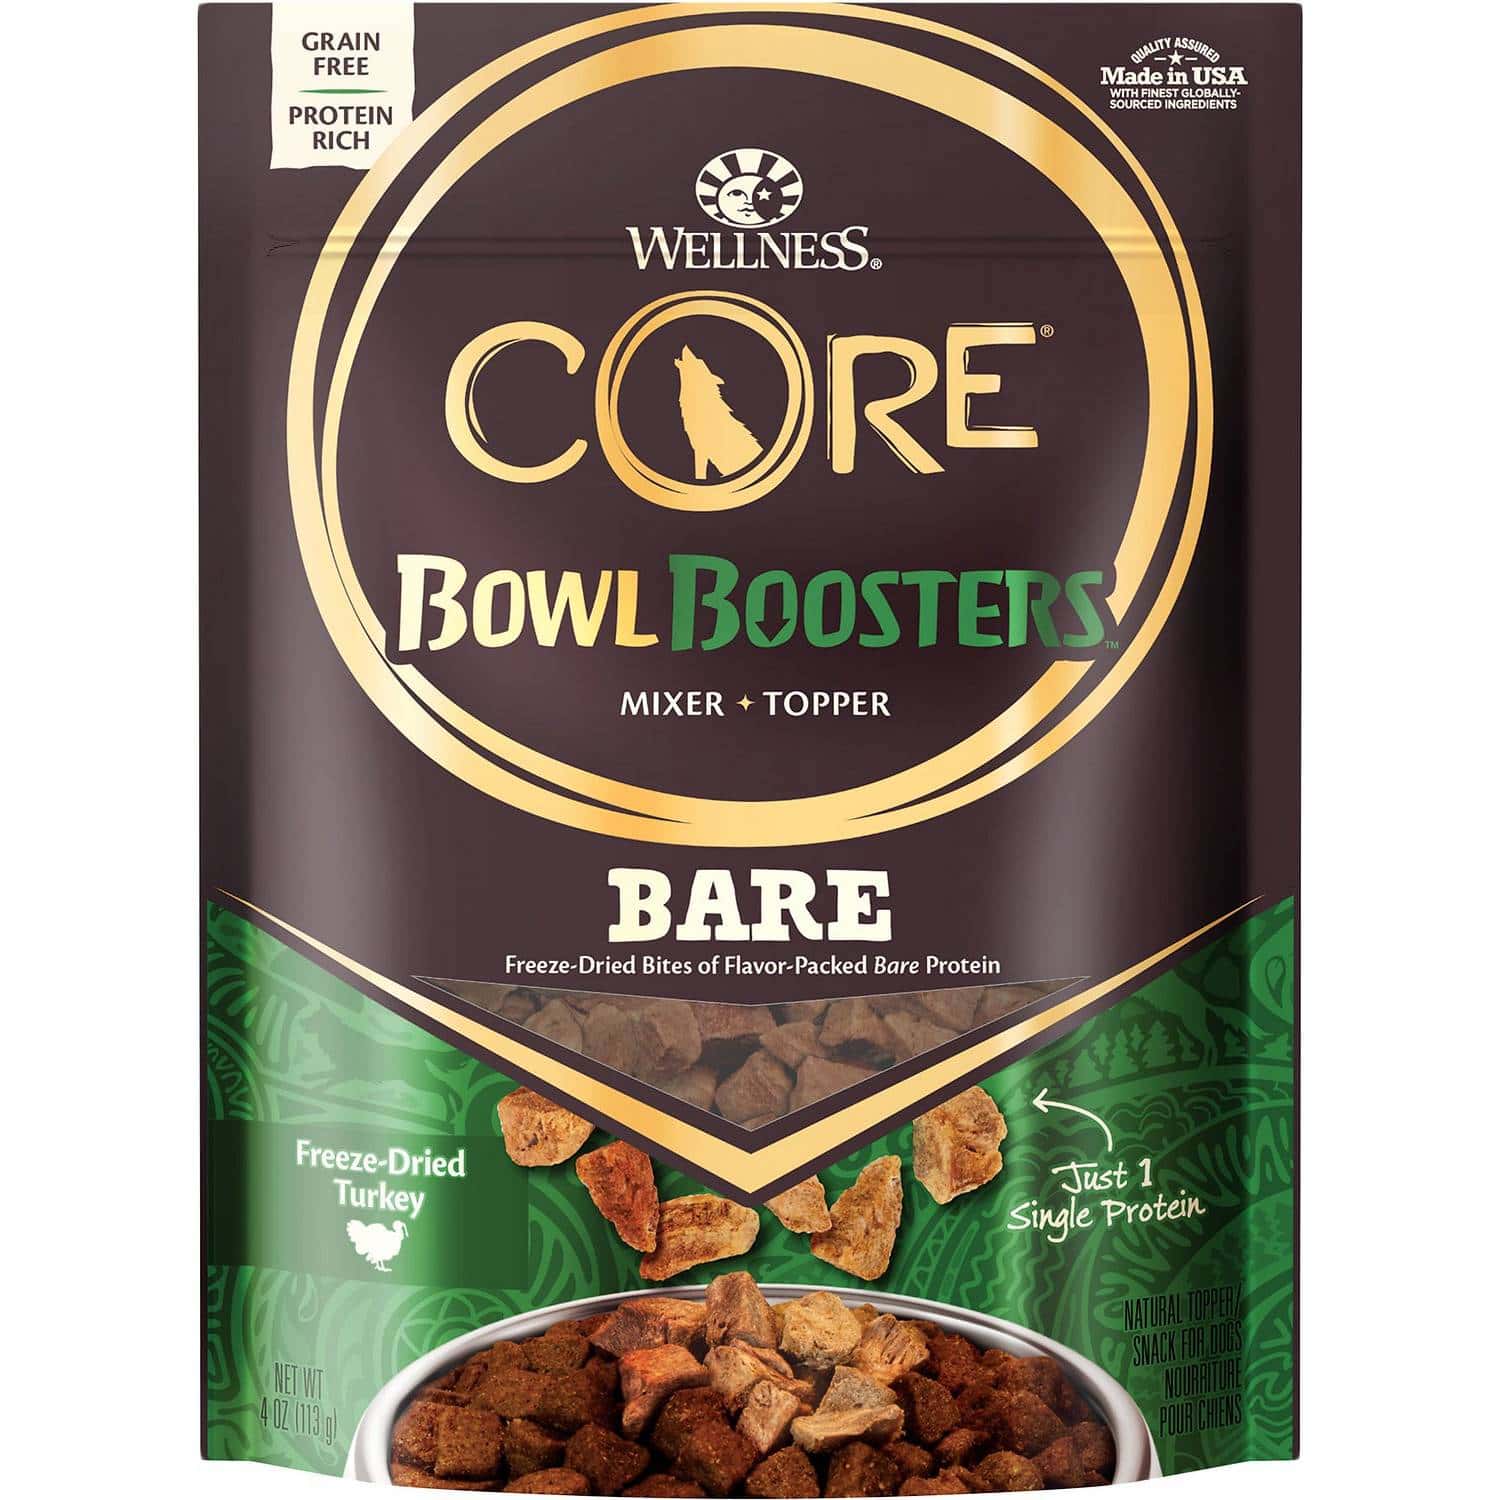 Wellness CORE Bowl Boosters Bare (1)